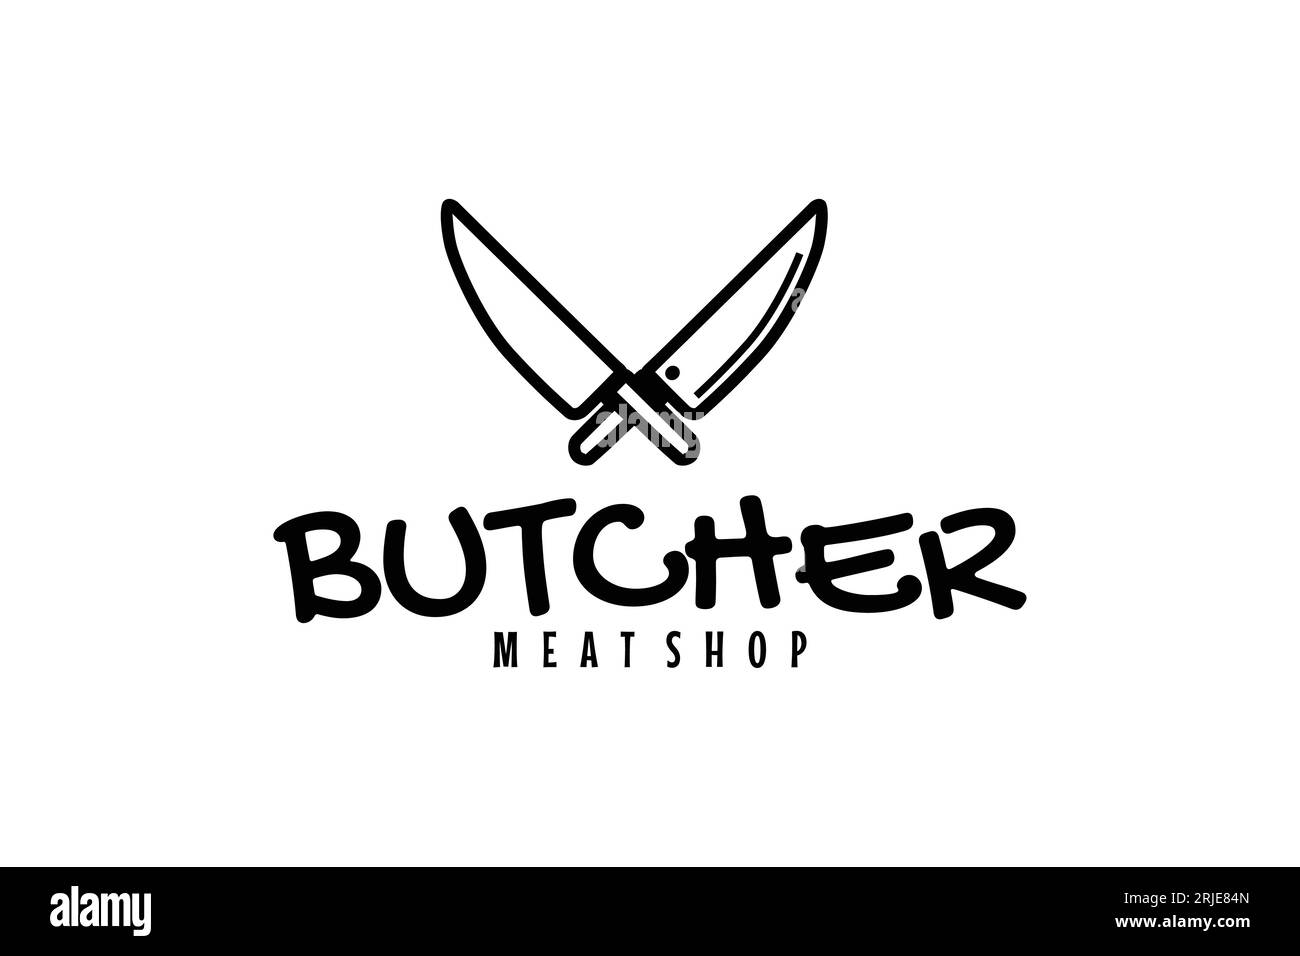 Butcher shop logo with crossed cleaver knife vector design Stock Vector ...